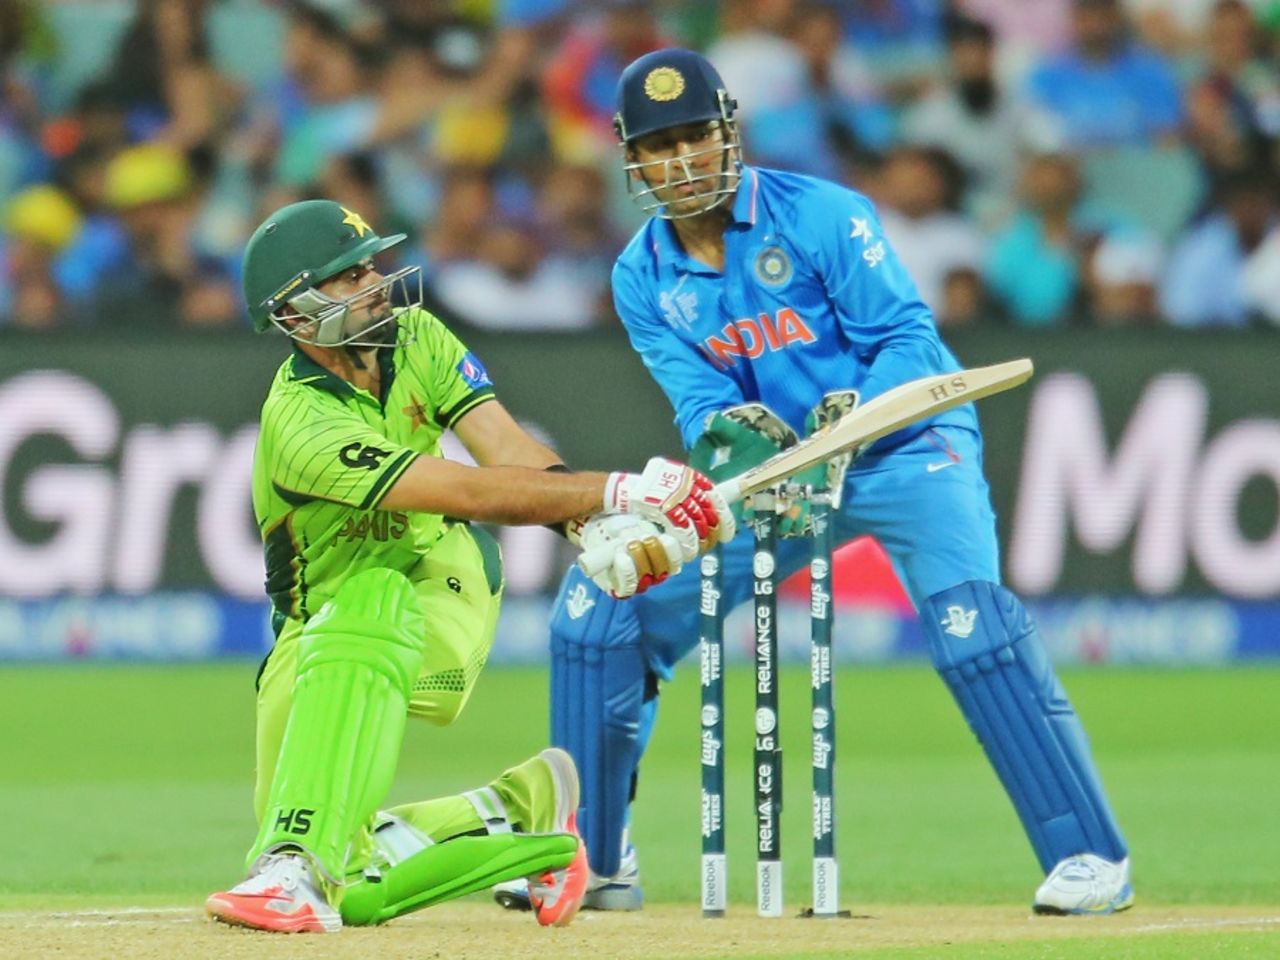 Ahmed Shehzad brings out the sweep, India v Pakistan, World Cup 2015, Group B, Adelaide, February 15, 2015